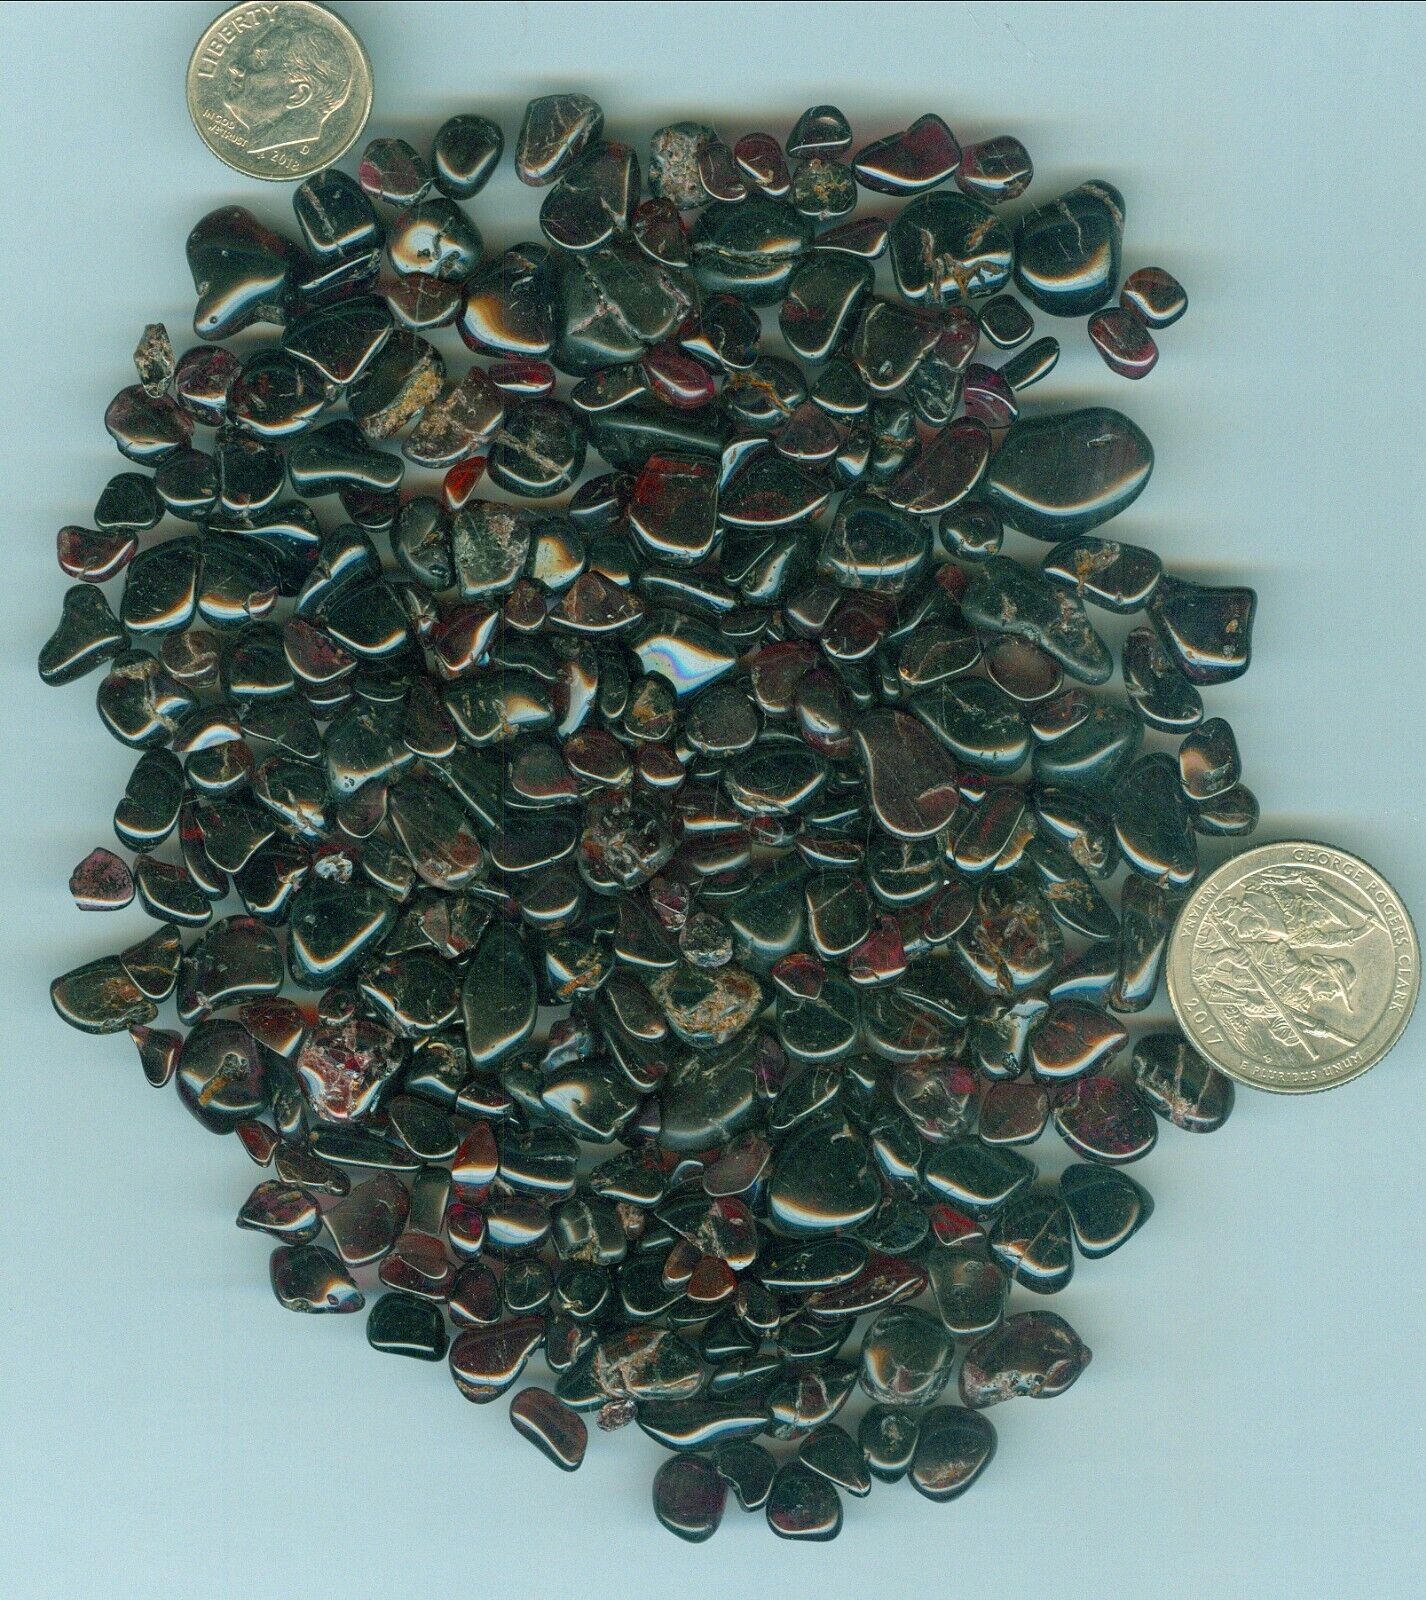 530 Grams of Natural Garnet Tumbled and Polished Pieces 8mm to 12mm Garnet rough